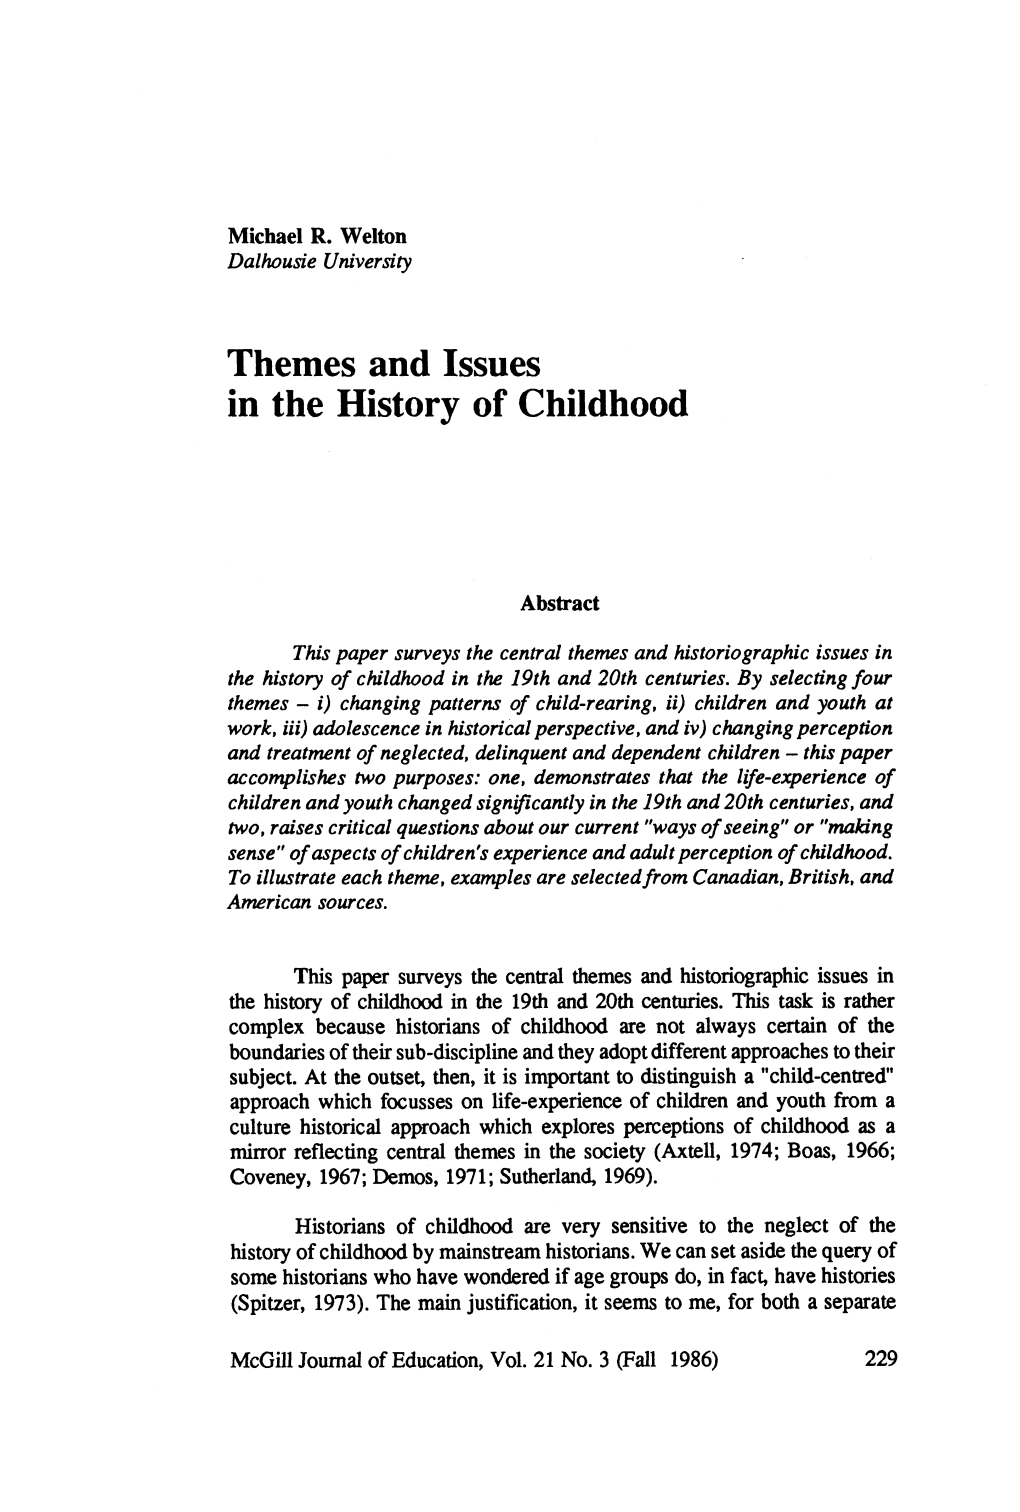 Themes and Issues in the History of Childhood